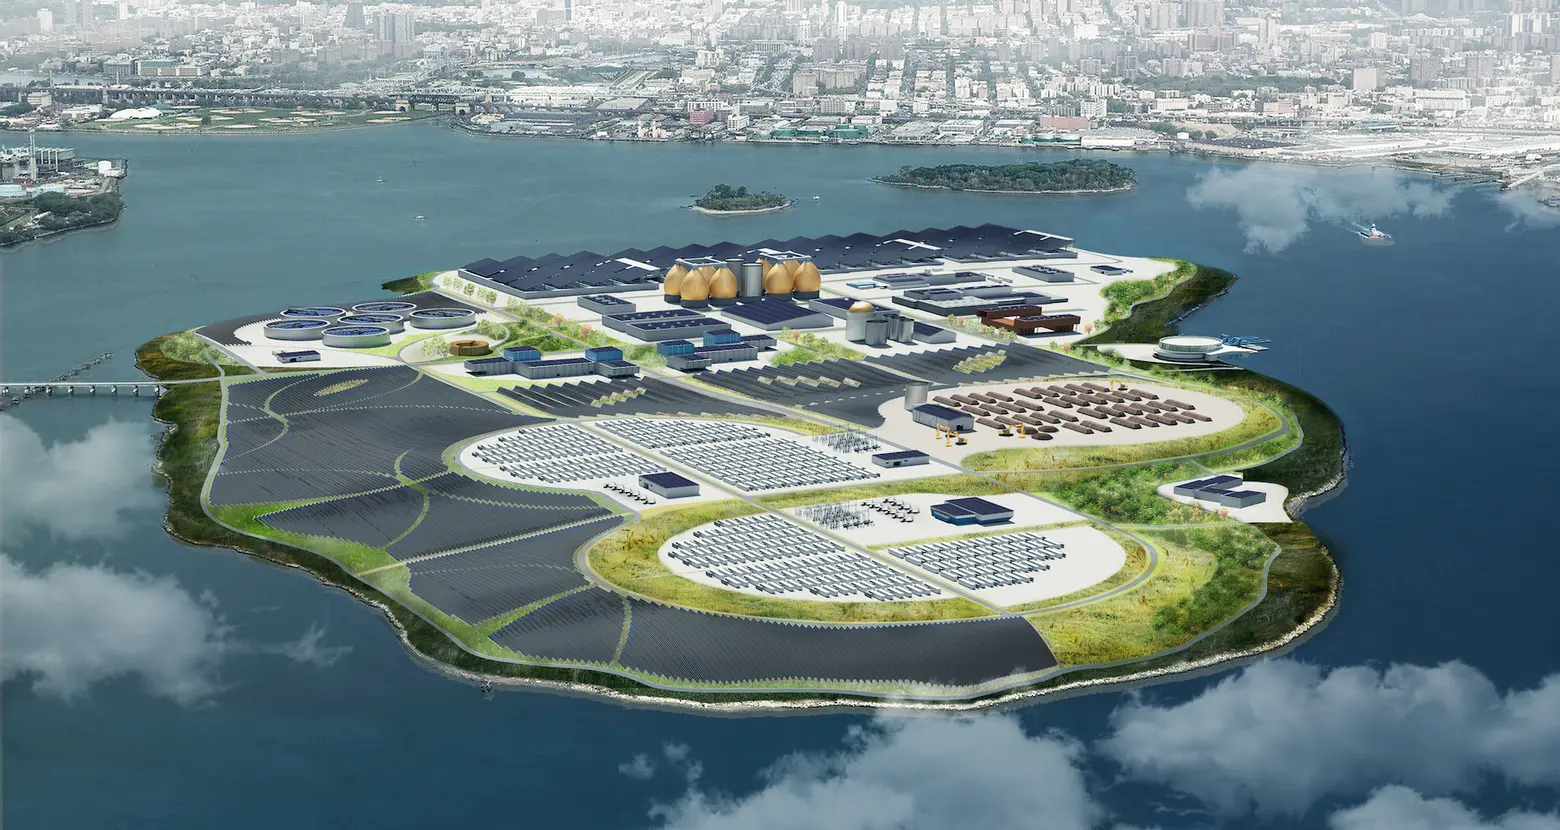 Here’s what Rikers Island could look like as a green infrastructure hub